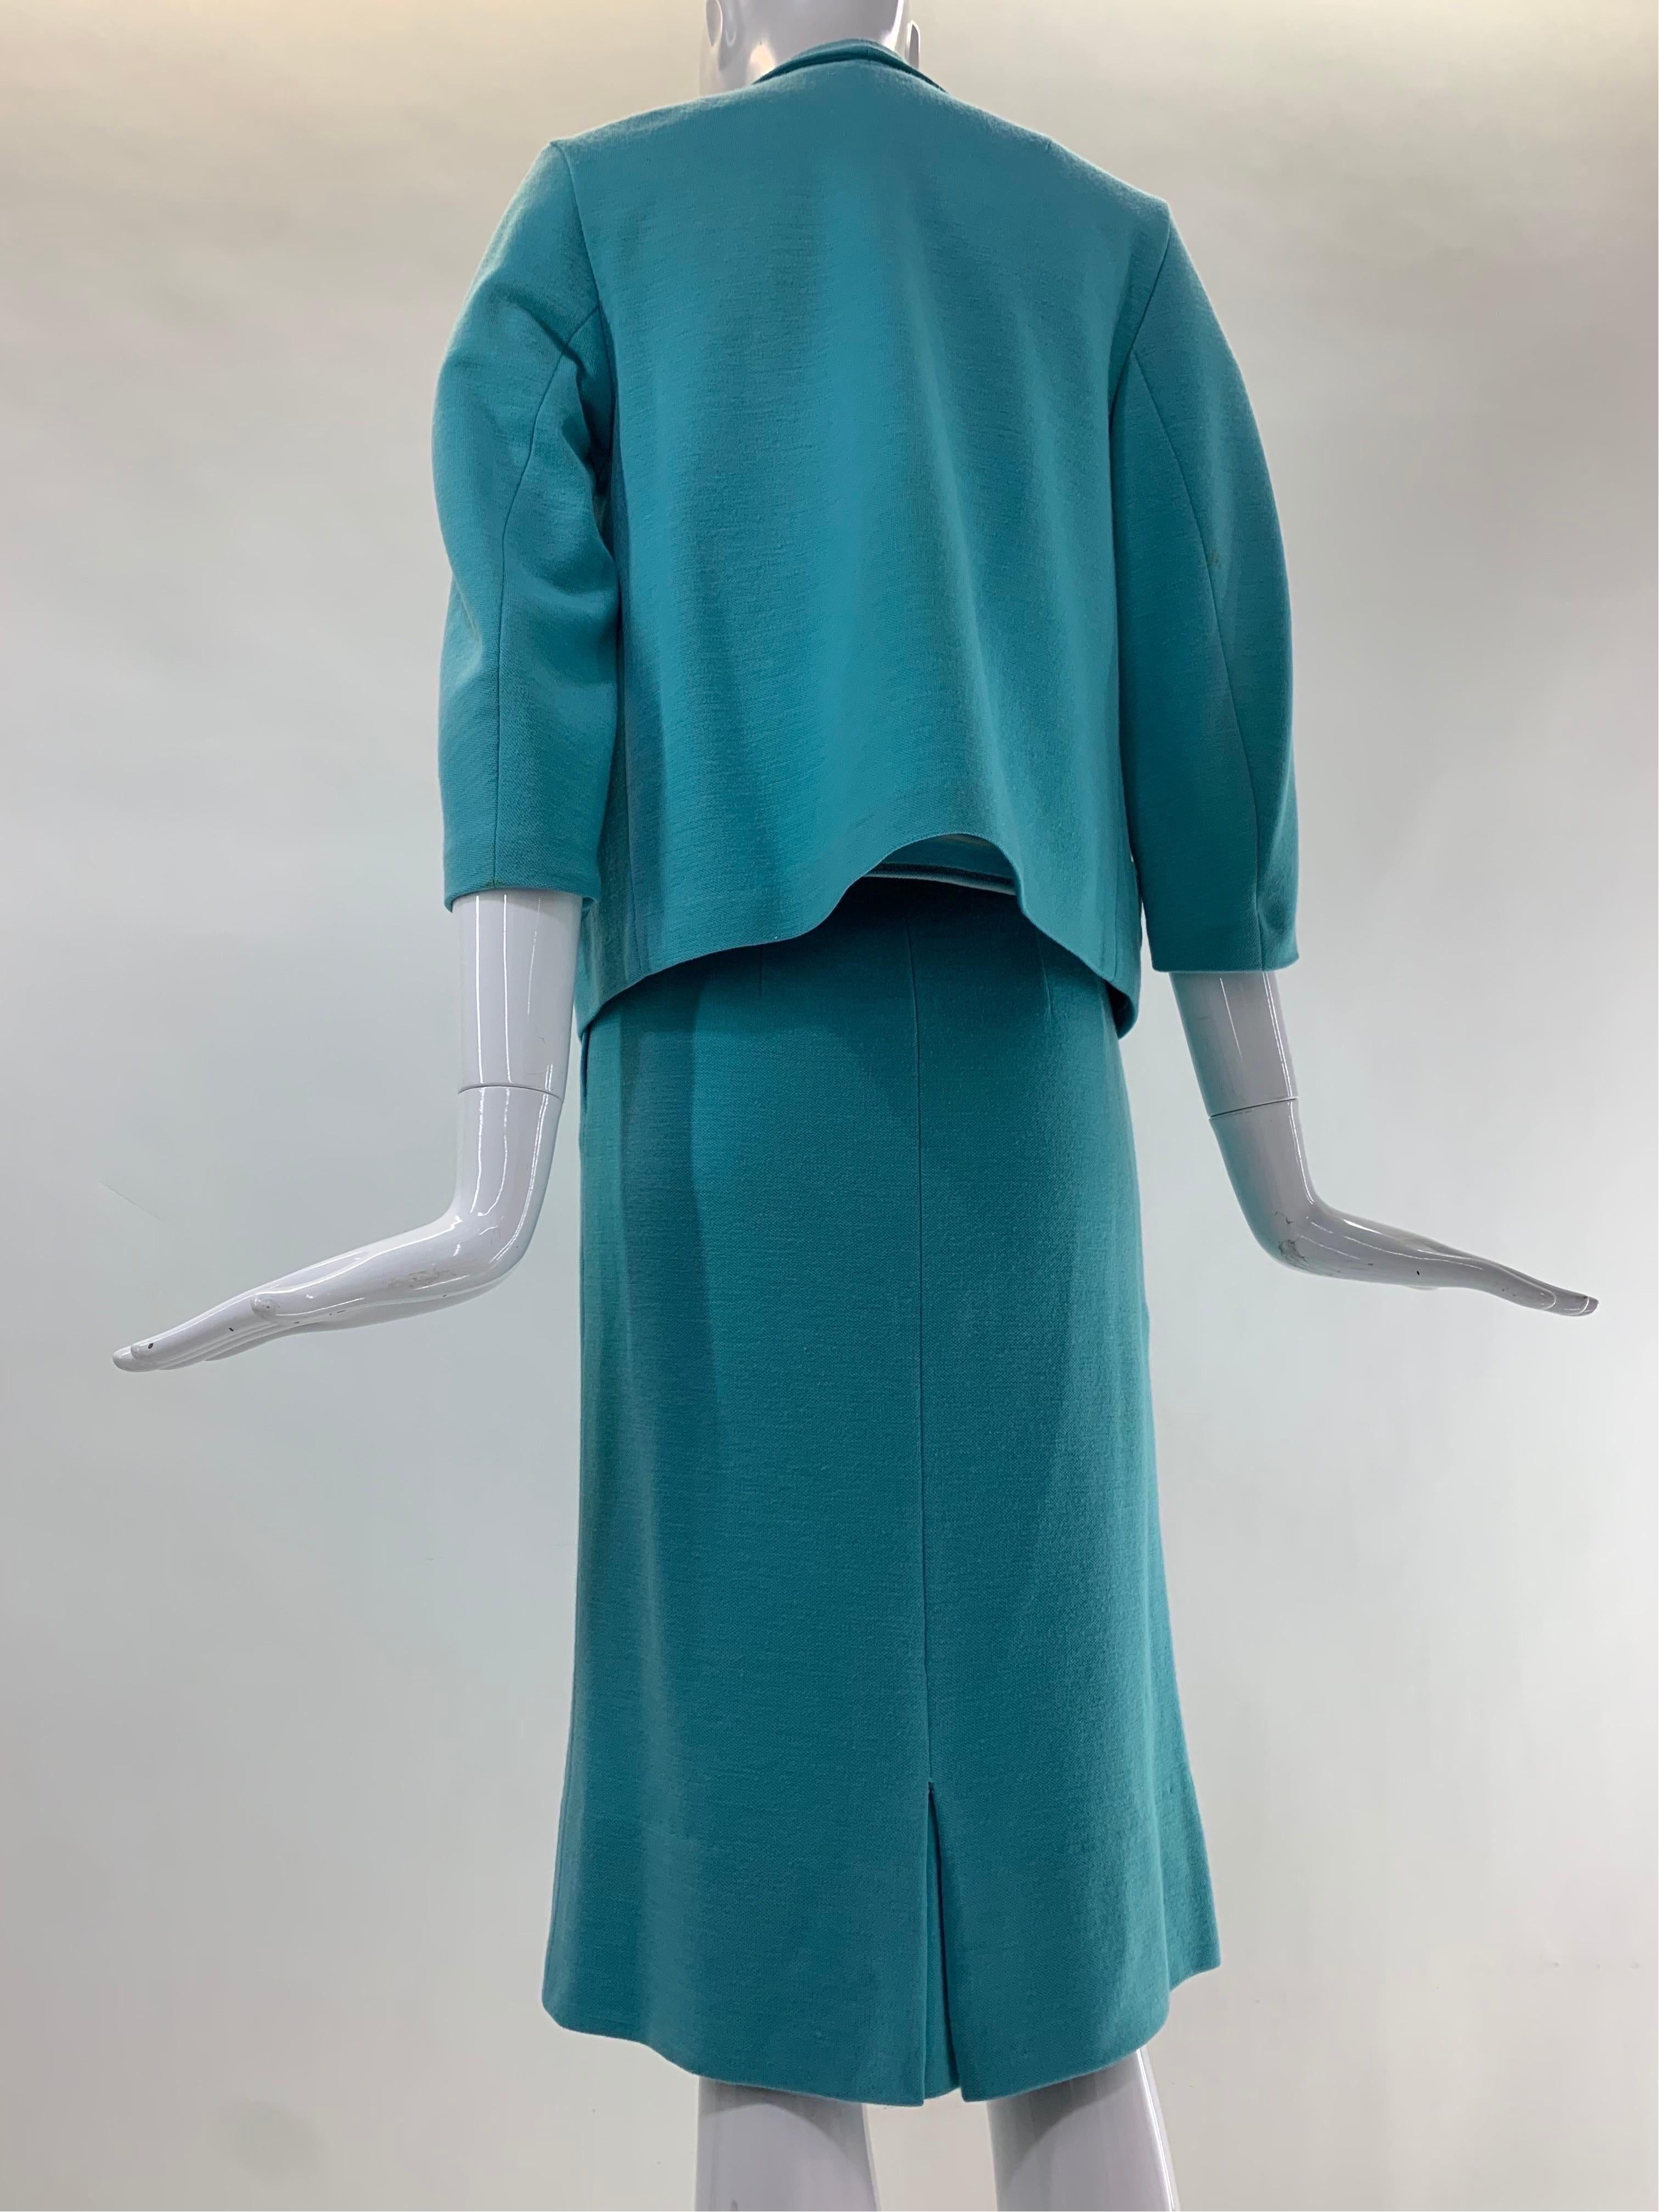 1960 Promenade - Holland Turquoise Wool Double-Knit 3-Piece Skirt Suit  In Excellent Condition For Sale In Gresham, OR